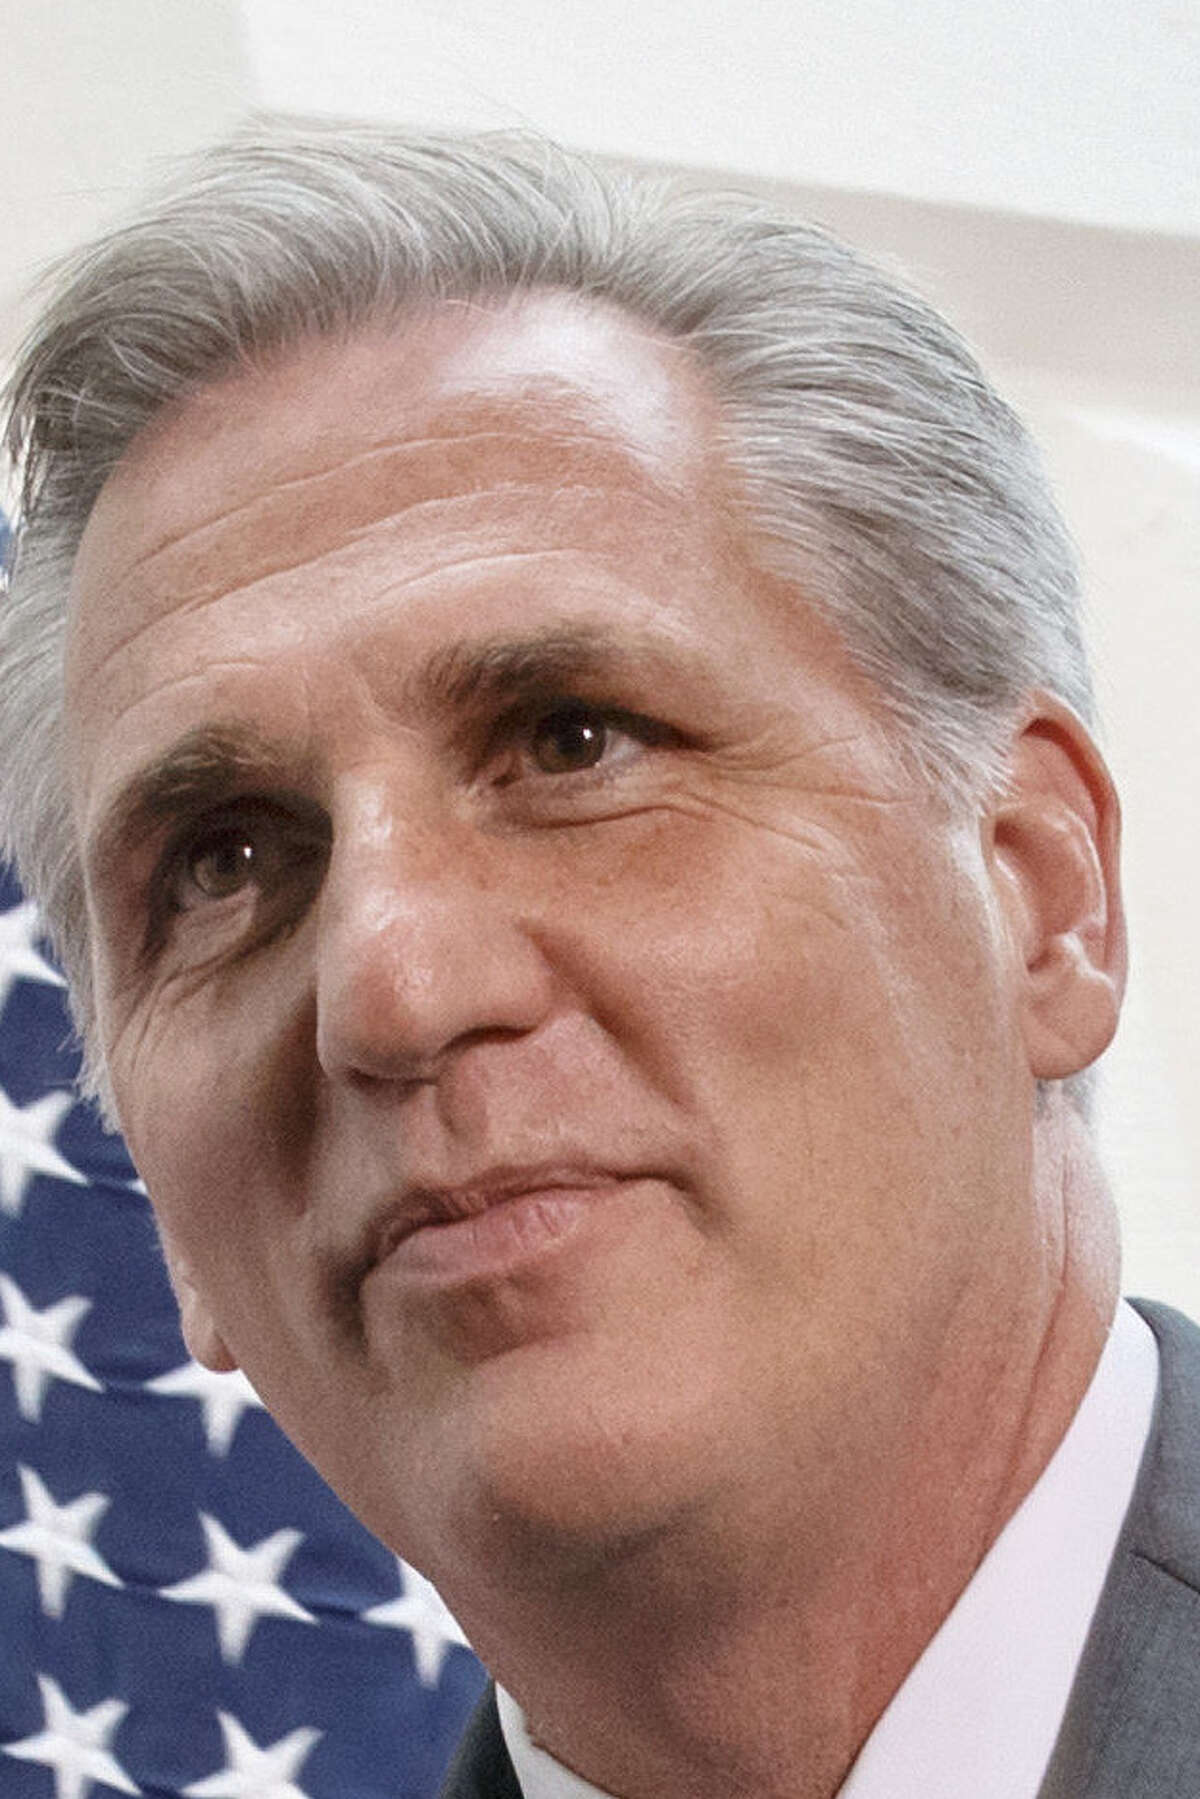 Rep. Kevin McCarthy, who holds the No. 3 spot, likely will take Eric Cantor's position.